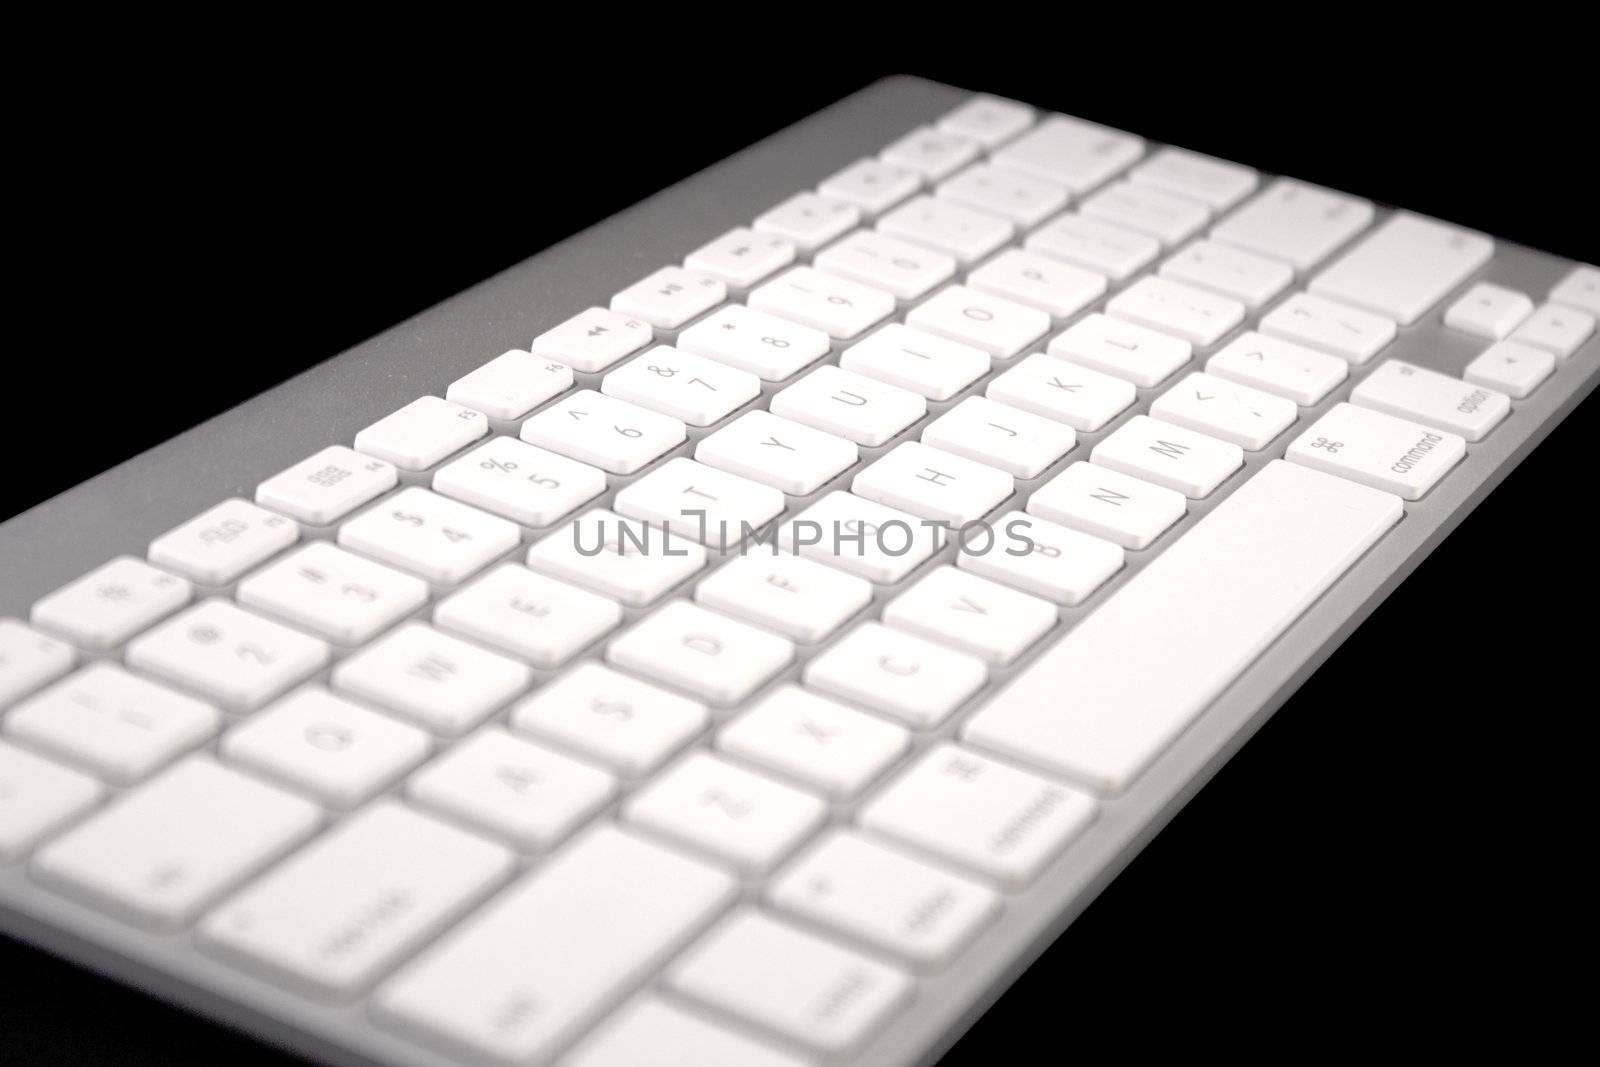 Keyboard of a notebook computer. White and black. by jeremywhat